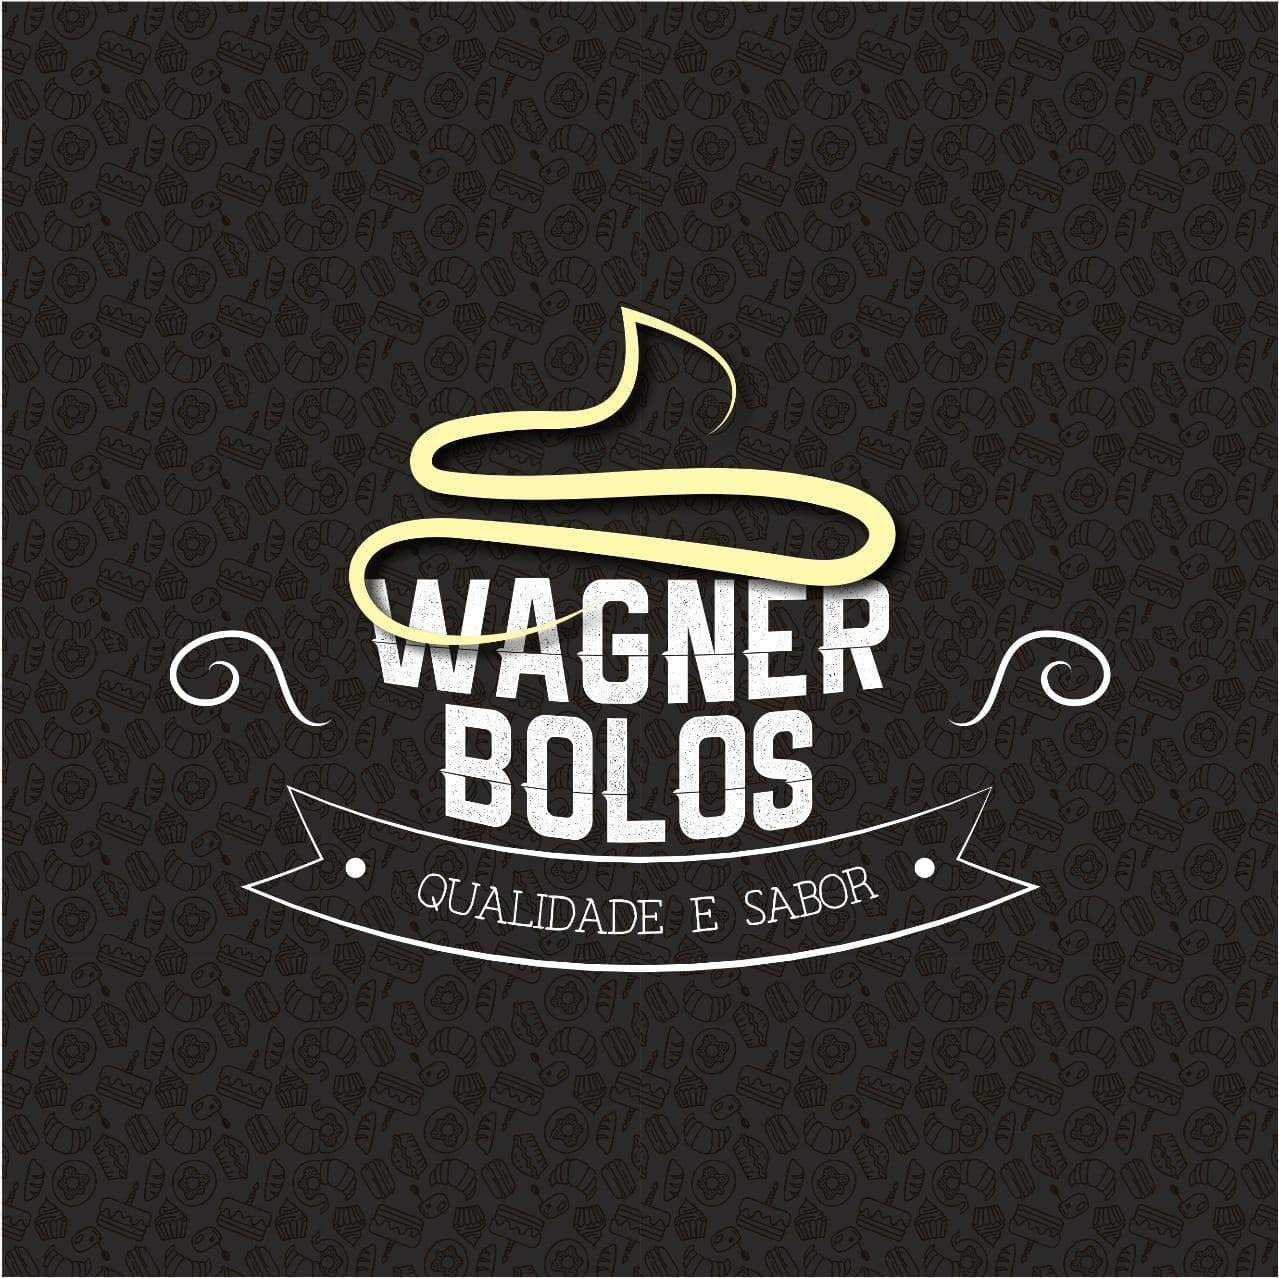 Wagner Bolos